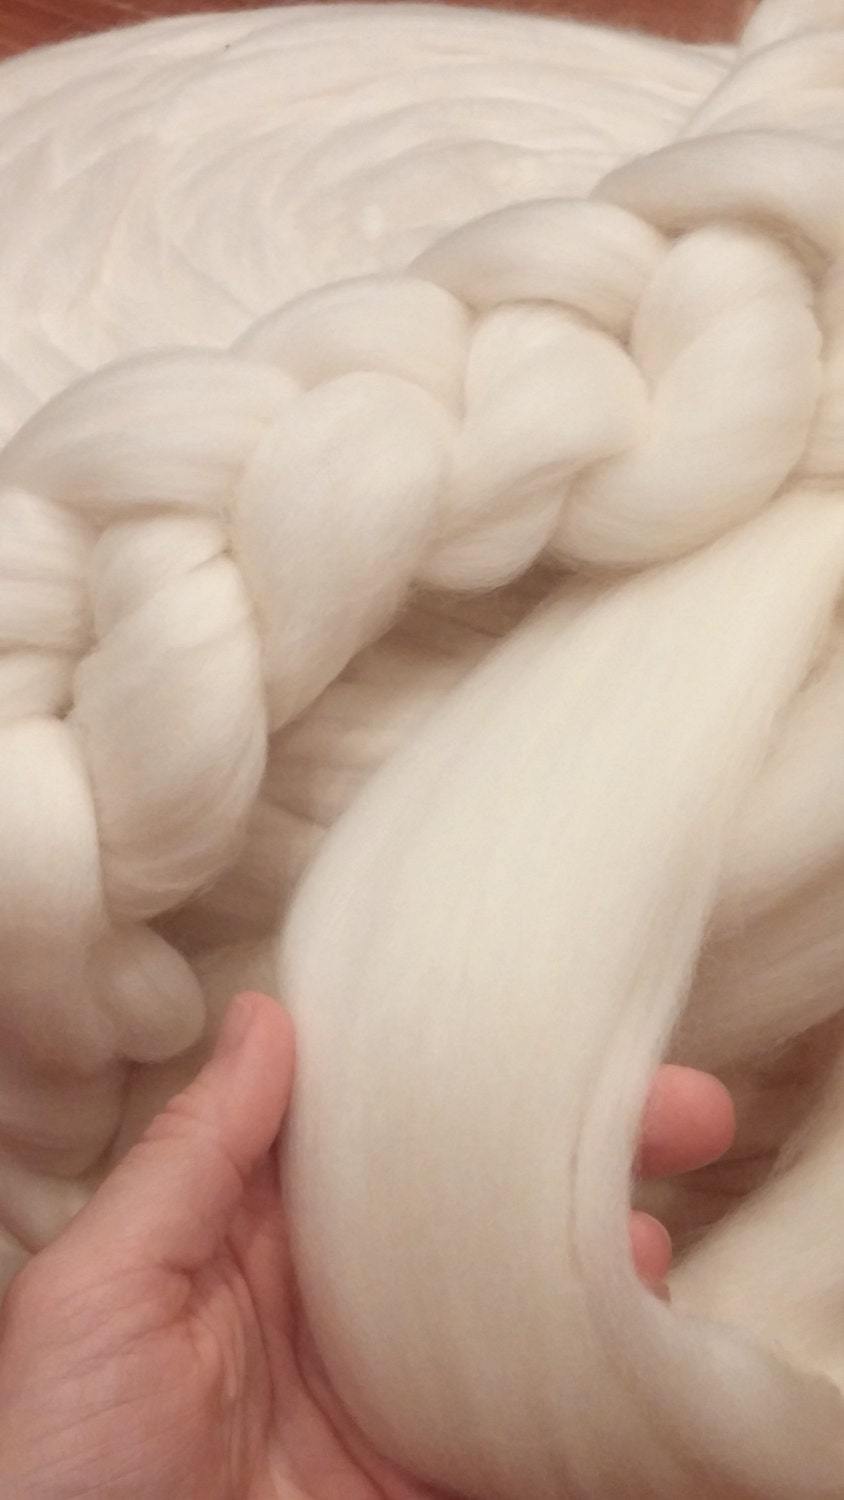 Wholesale 100% Wool Giant Thick Arm Knitting Giant Yarn Super